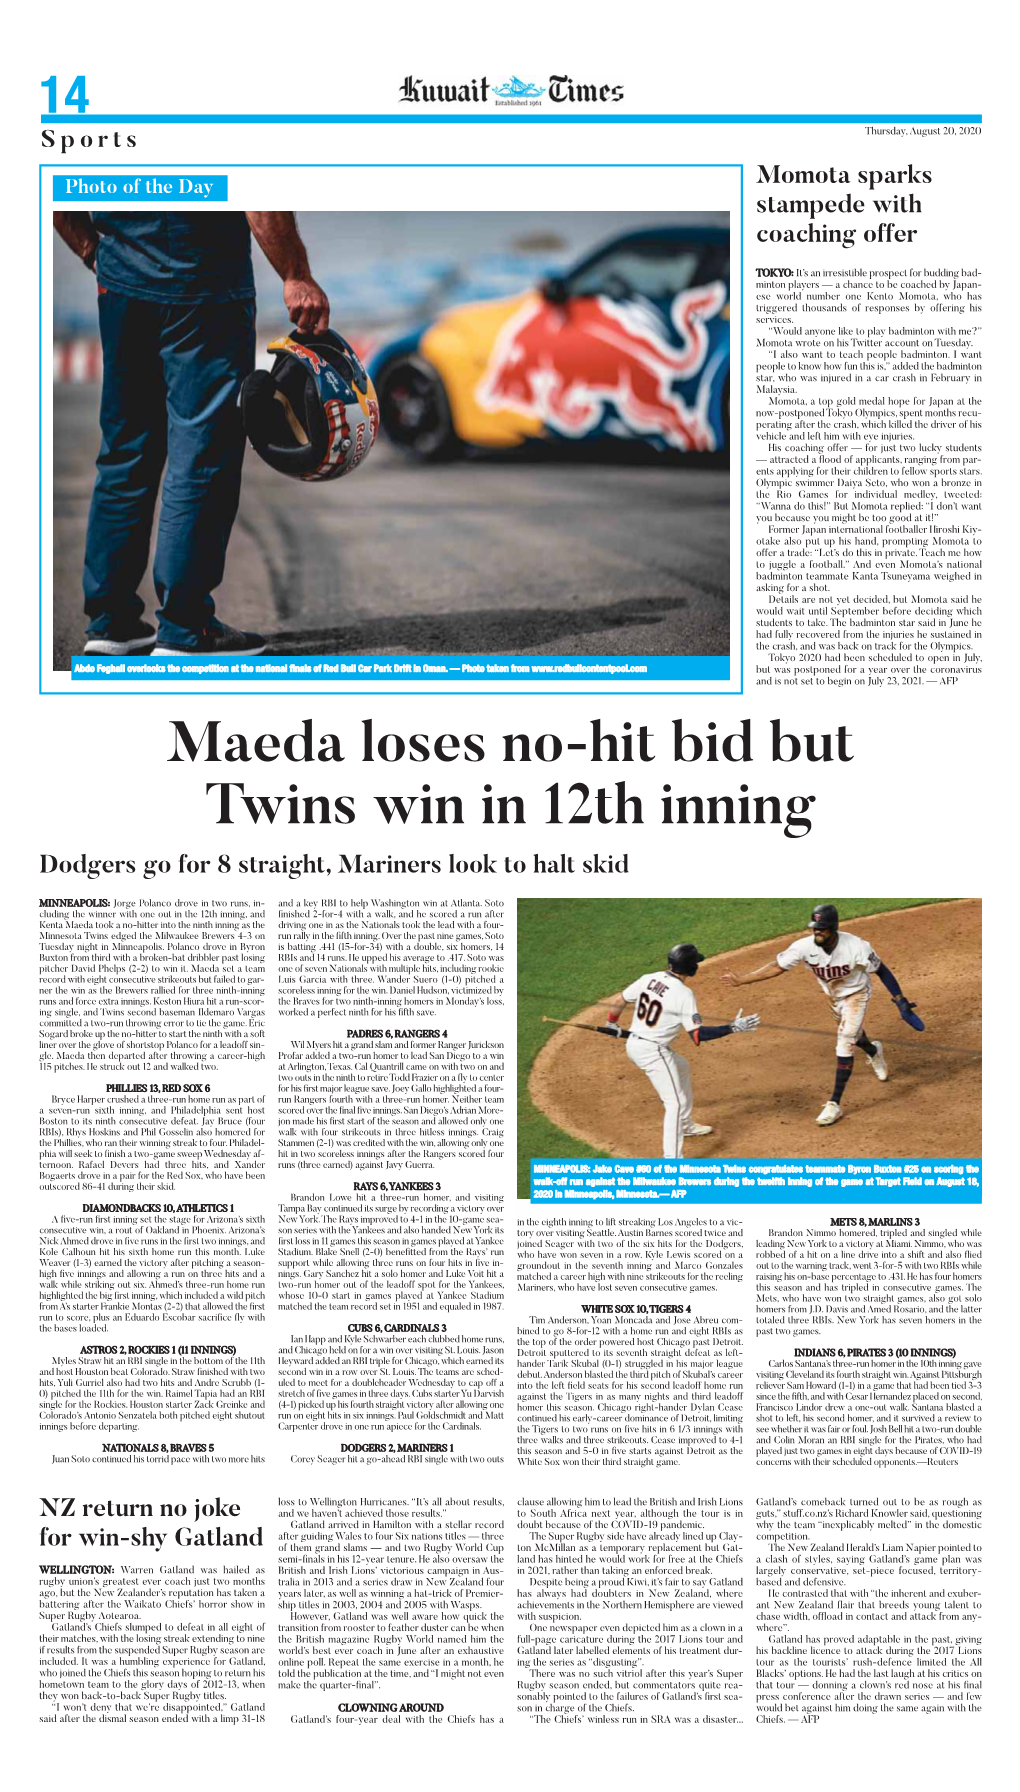 Maeda Loses No-Hit Bid but Twins Win in 12Th Inning Dodgers Go for 8 Straight, Mariners Look to Halt Skid